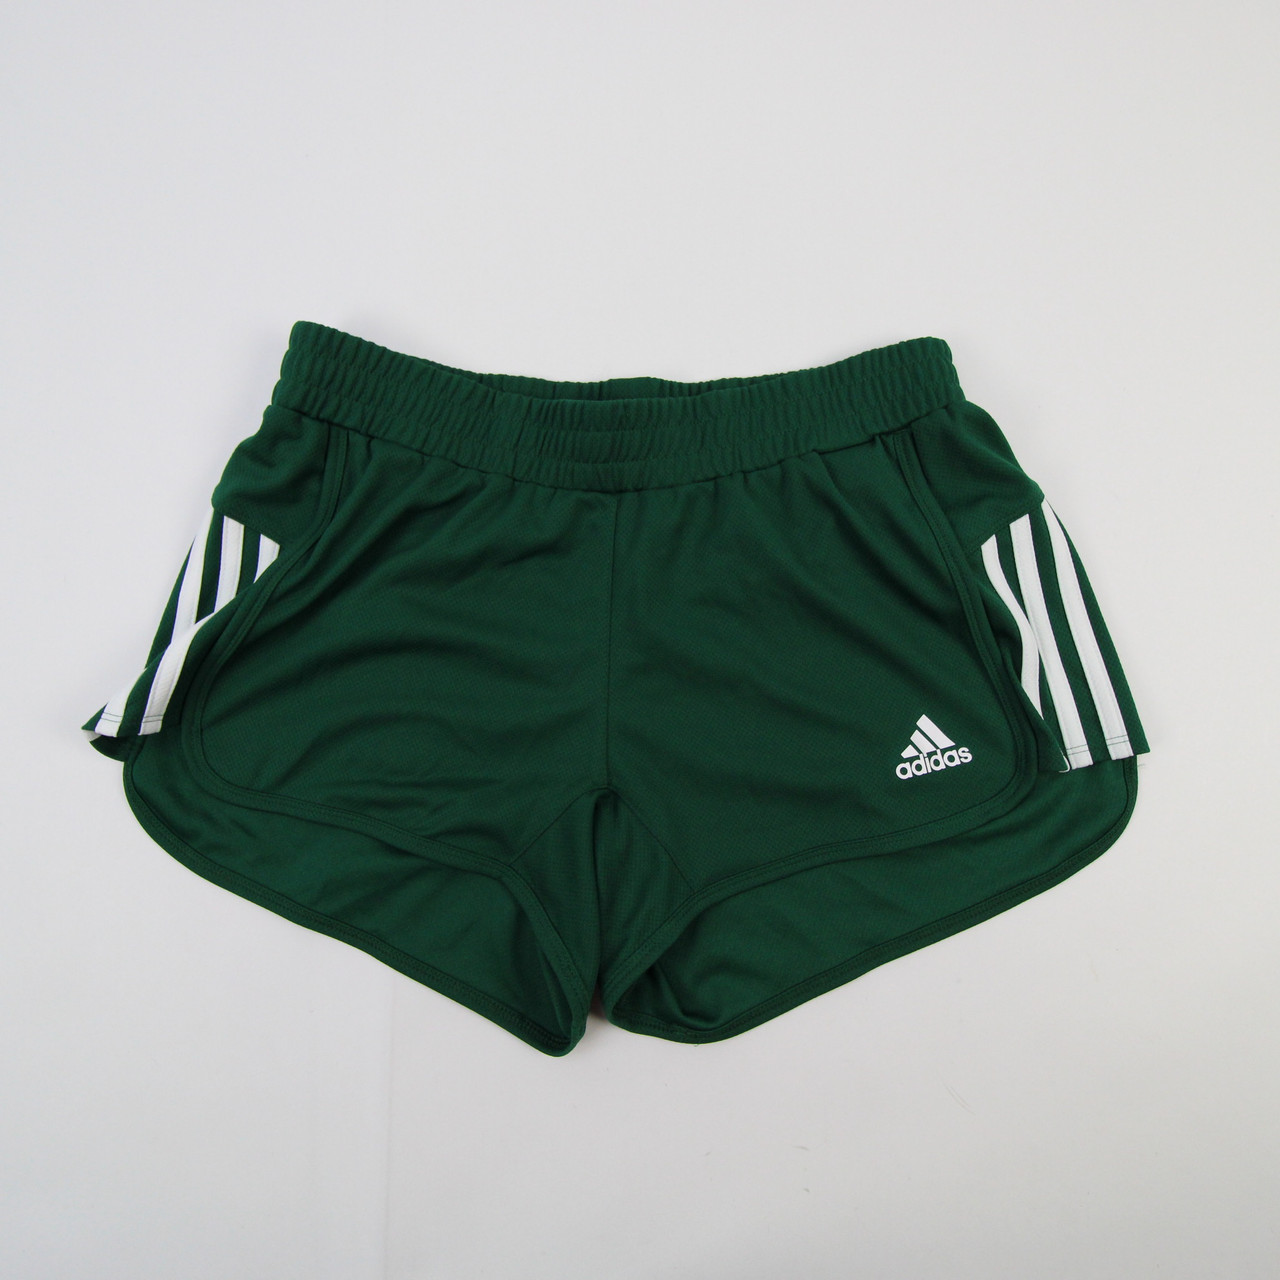 adidas Climalite Athletic Shorts Women's Green New with Tags XL 861